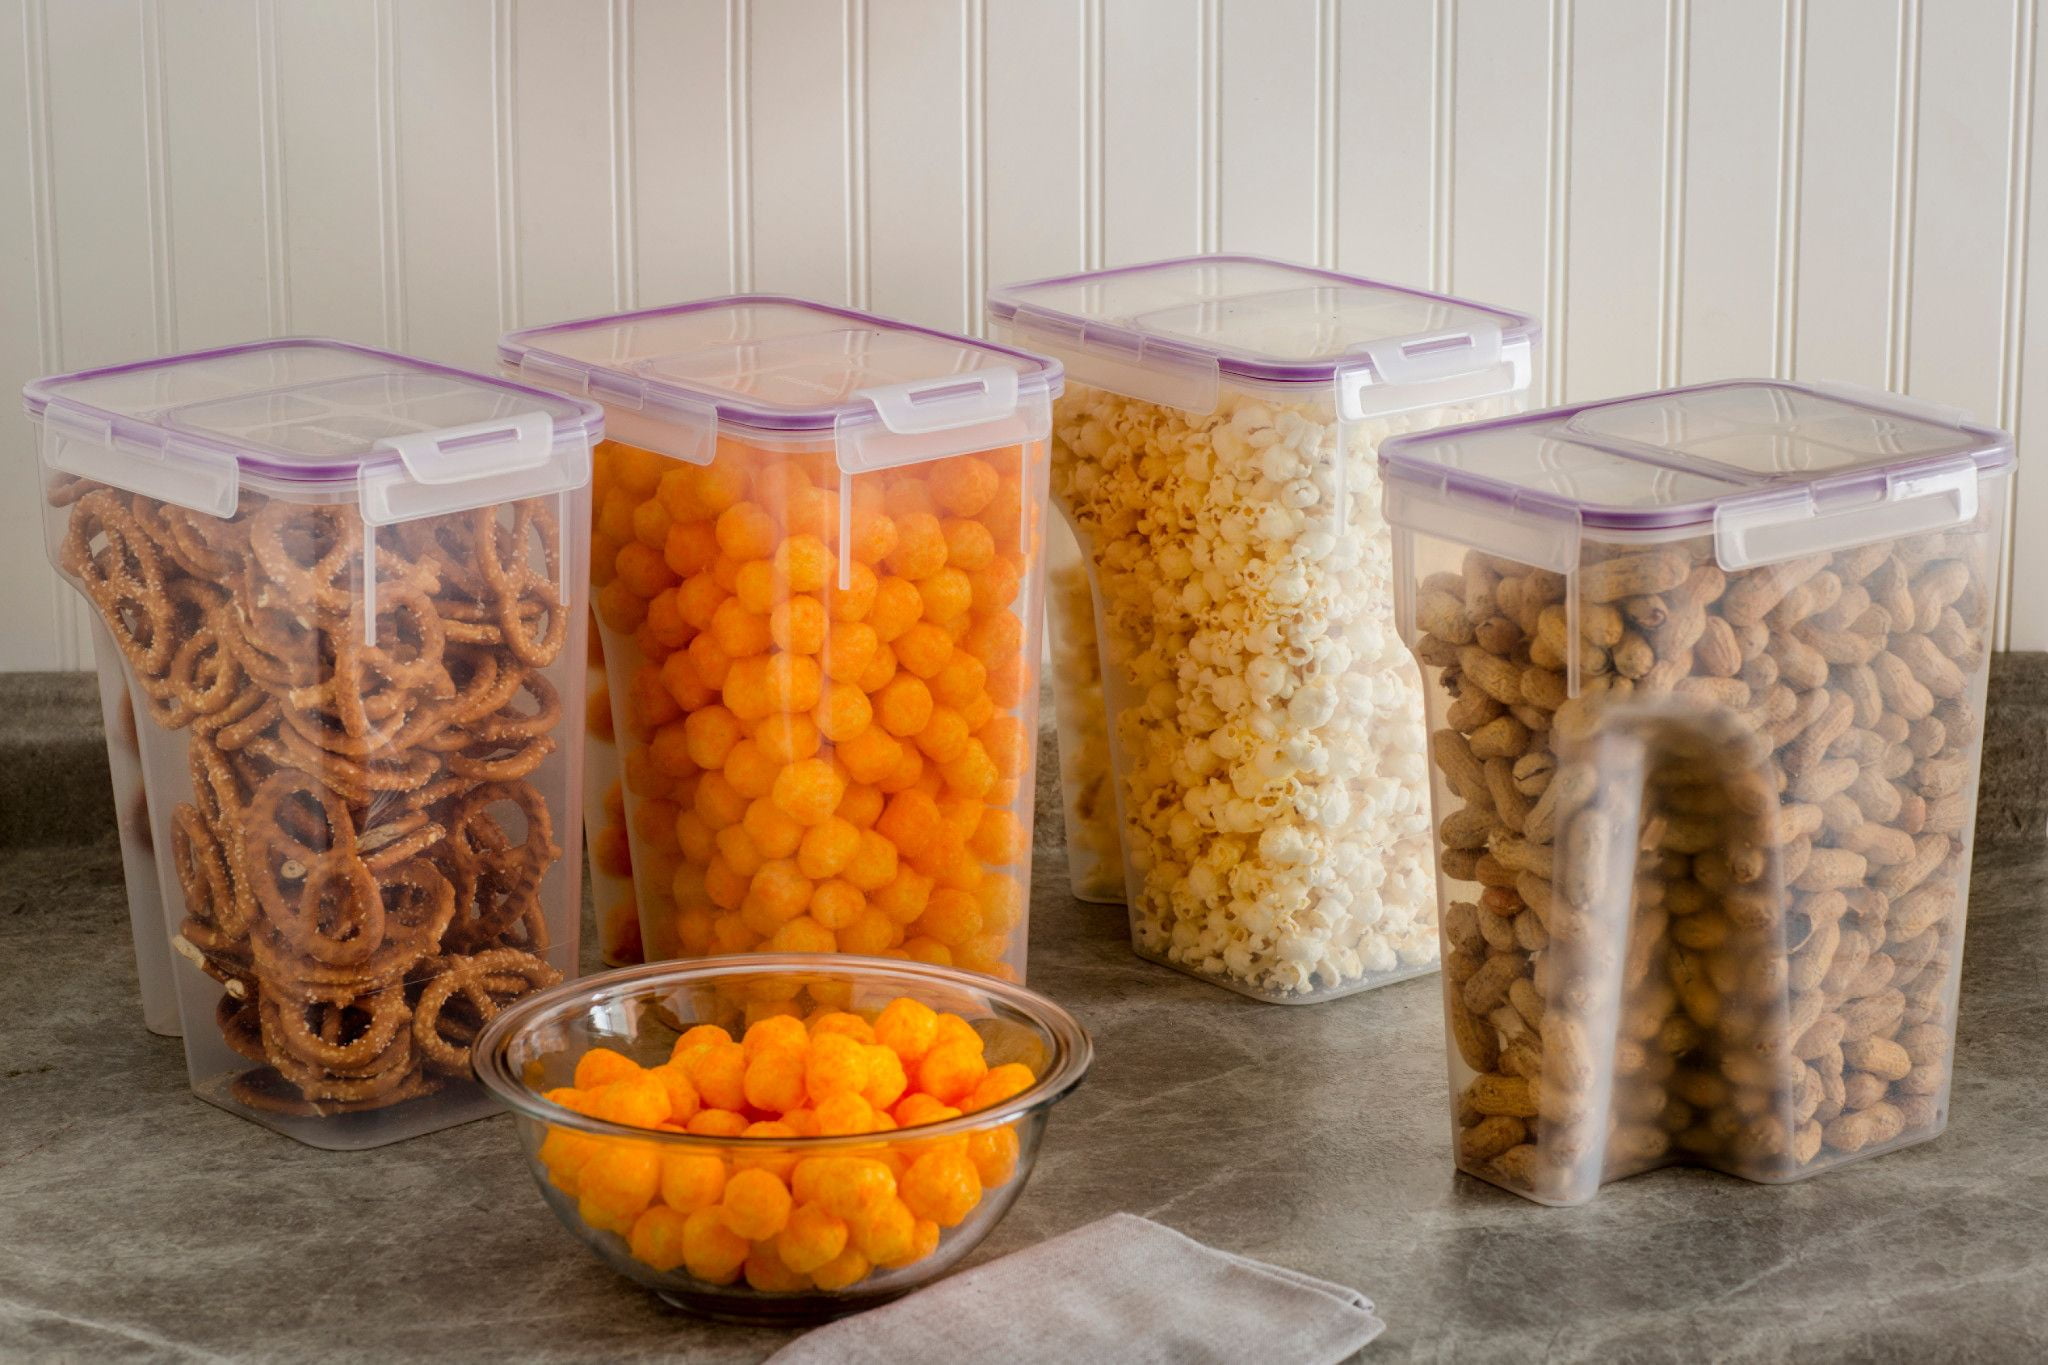  Snapware Airtight 2-Pack (22.8 Cup) Cereal Dispenser Storage  Containers, Flip-Top Lid BPA Free, Plastic Containers For Cereal, Rice,  Snack, Dry Food and Pantry Organization: Home & Kitchen